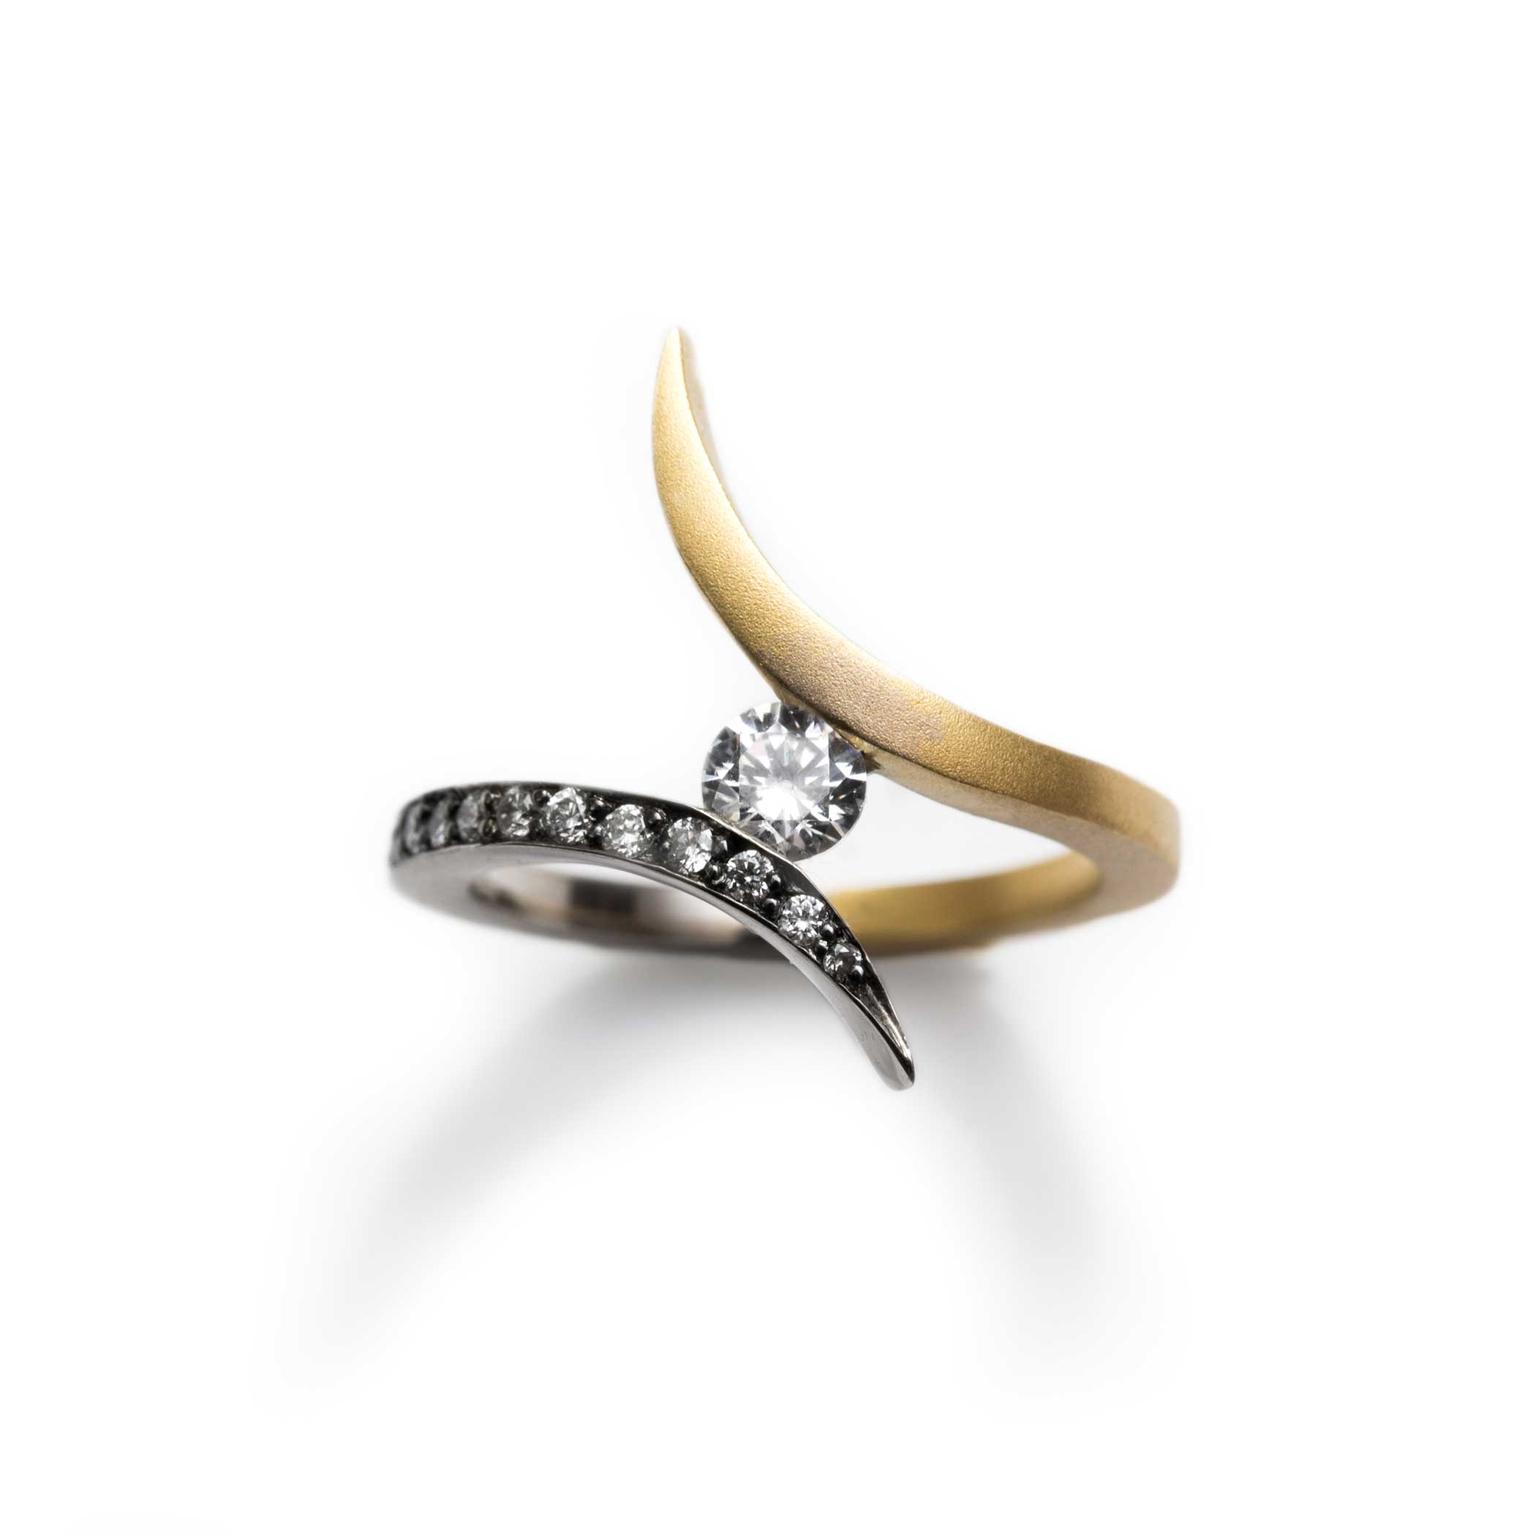 Break from the traditional with an unusual engagement ring 